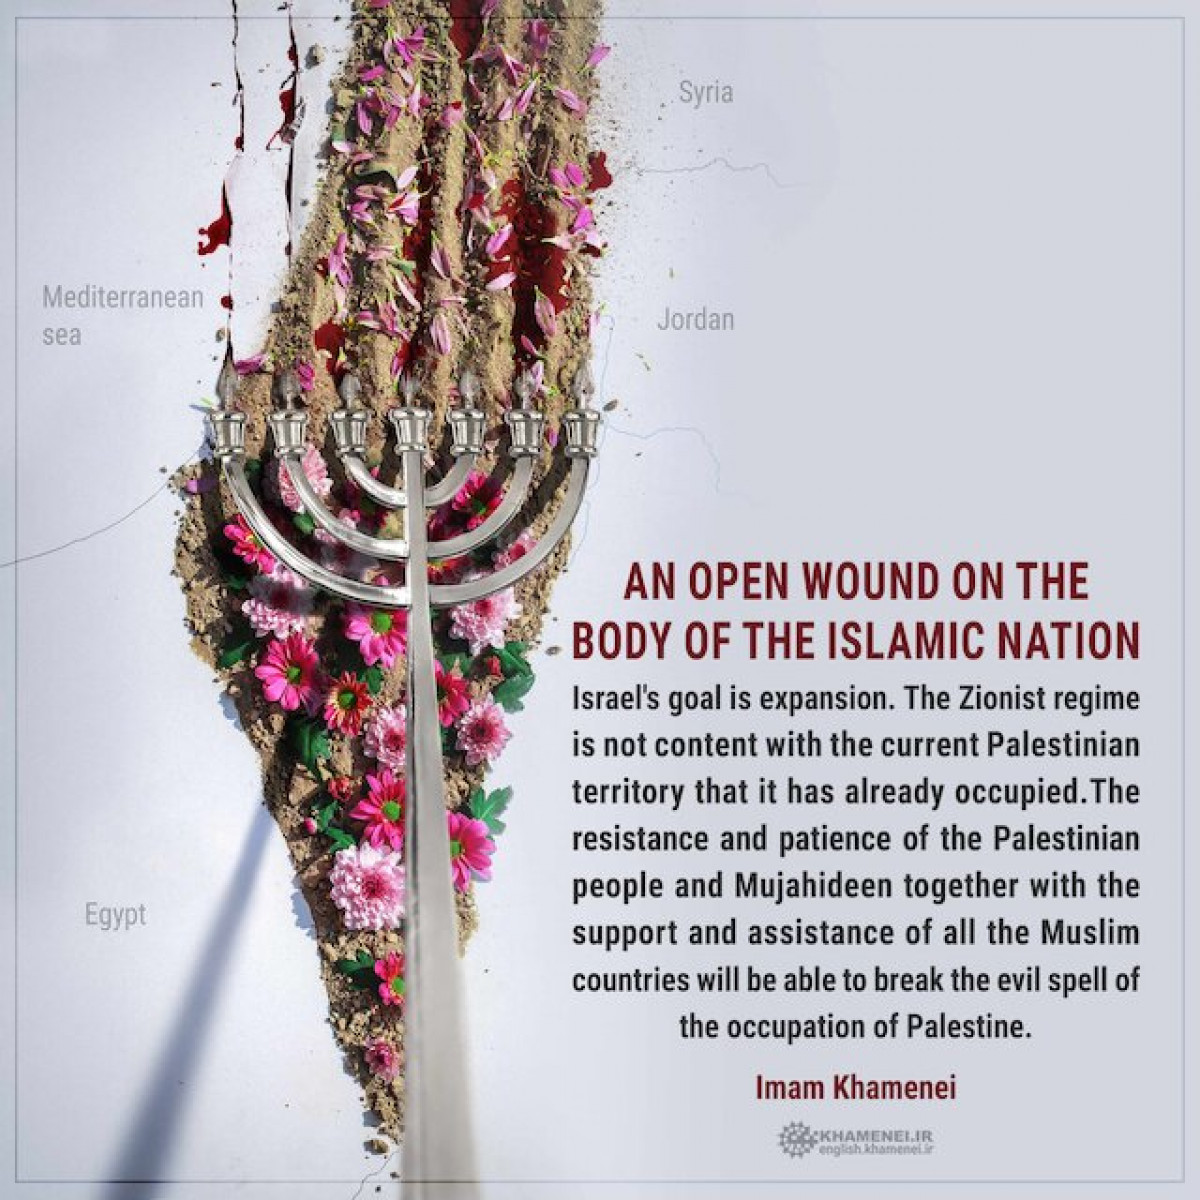 An open wound on the body of the Islamic nation